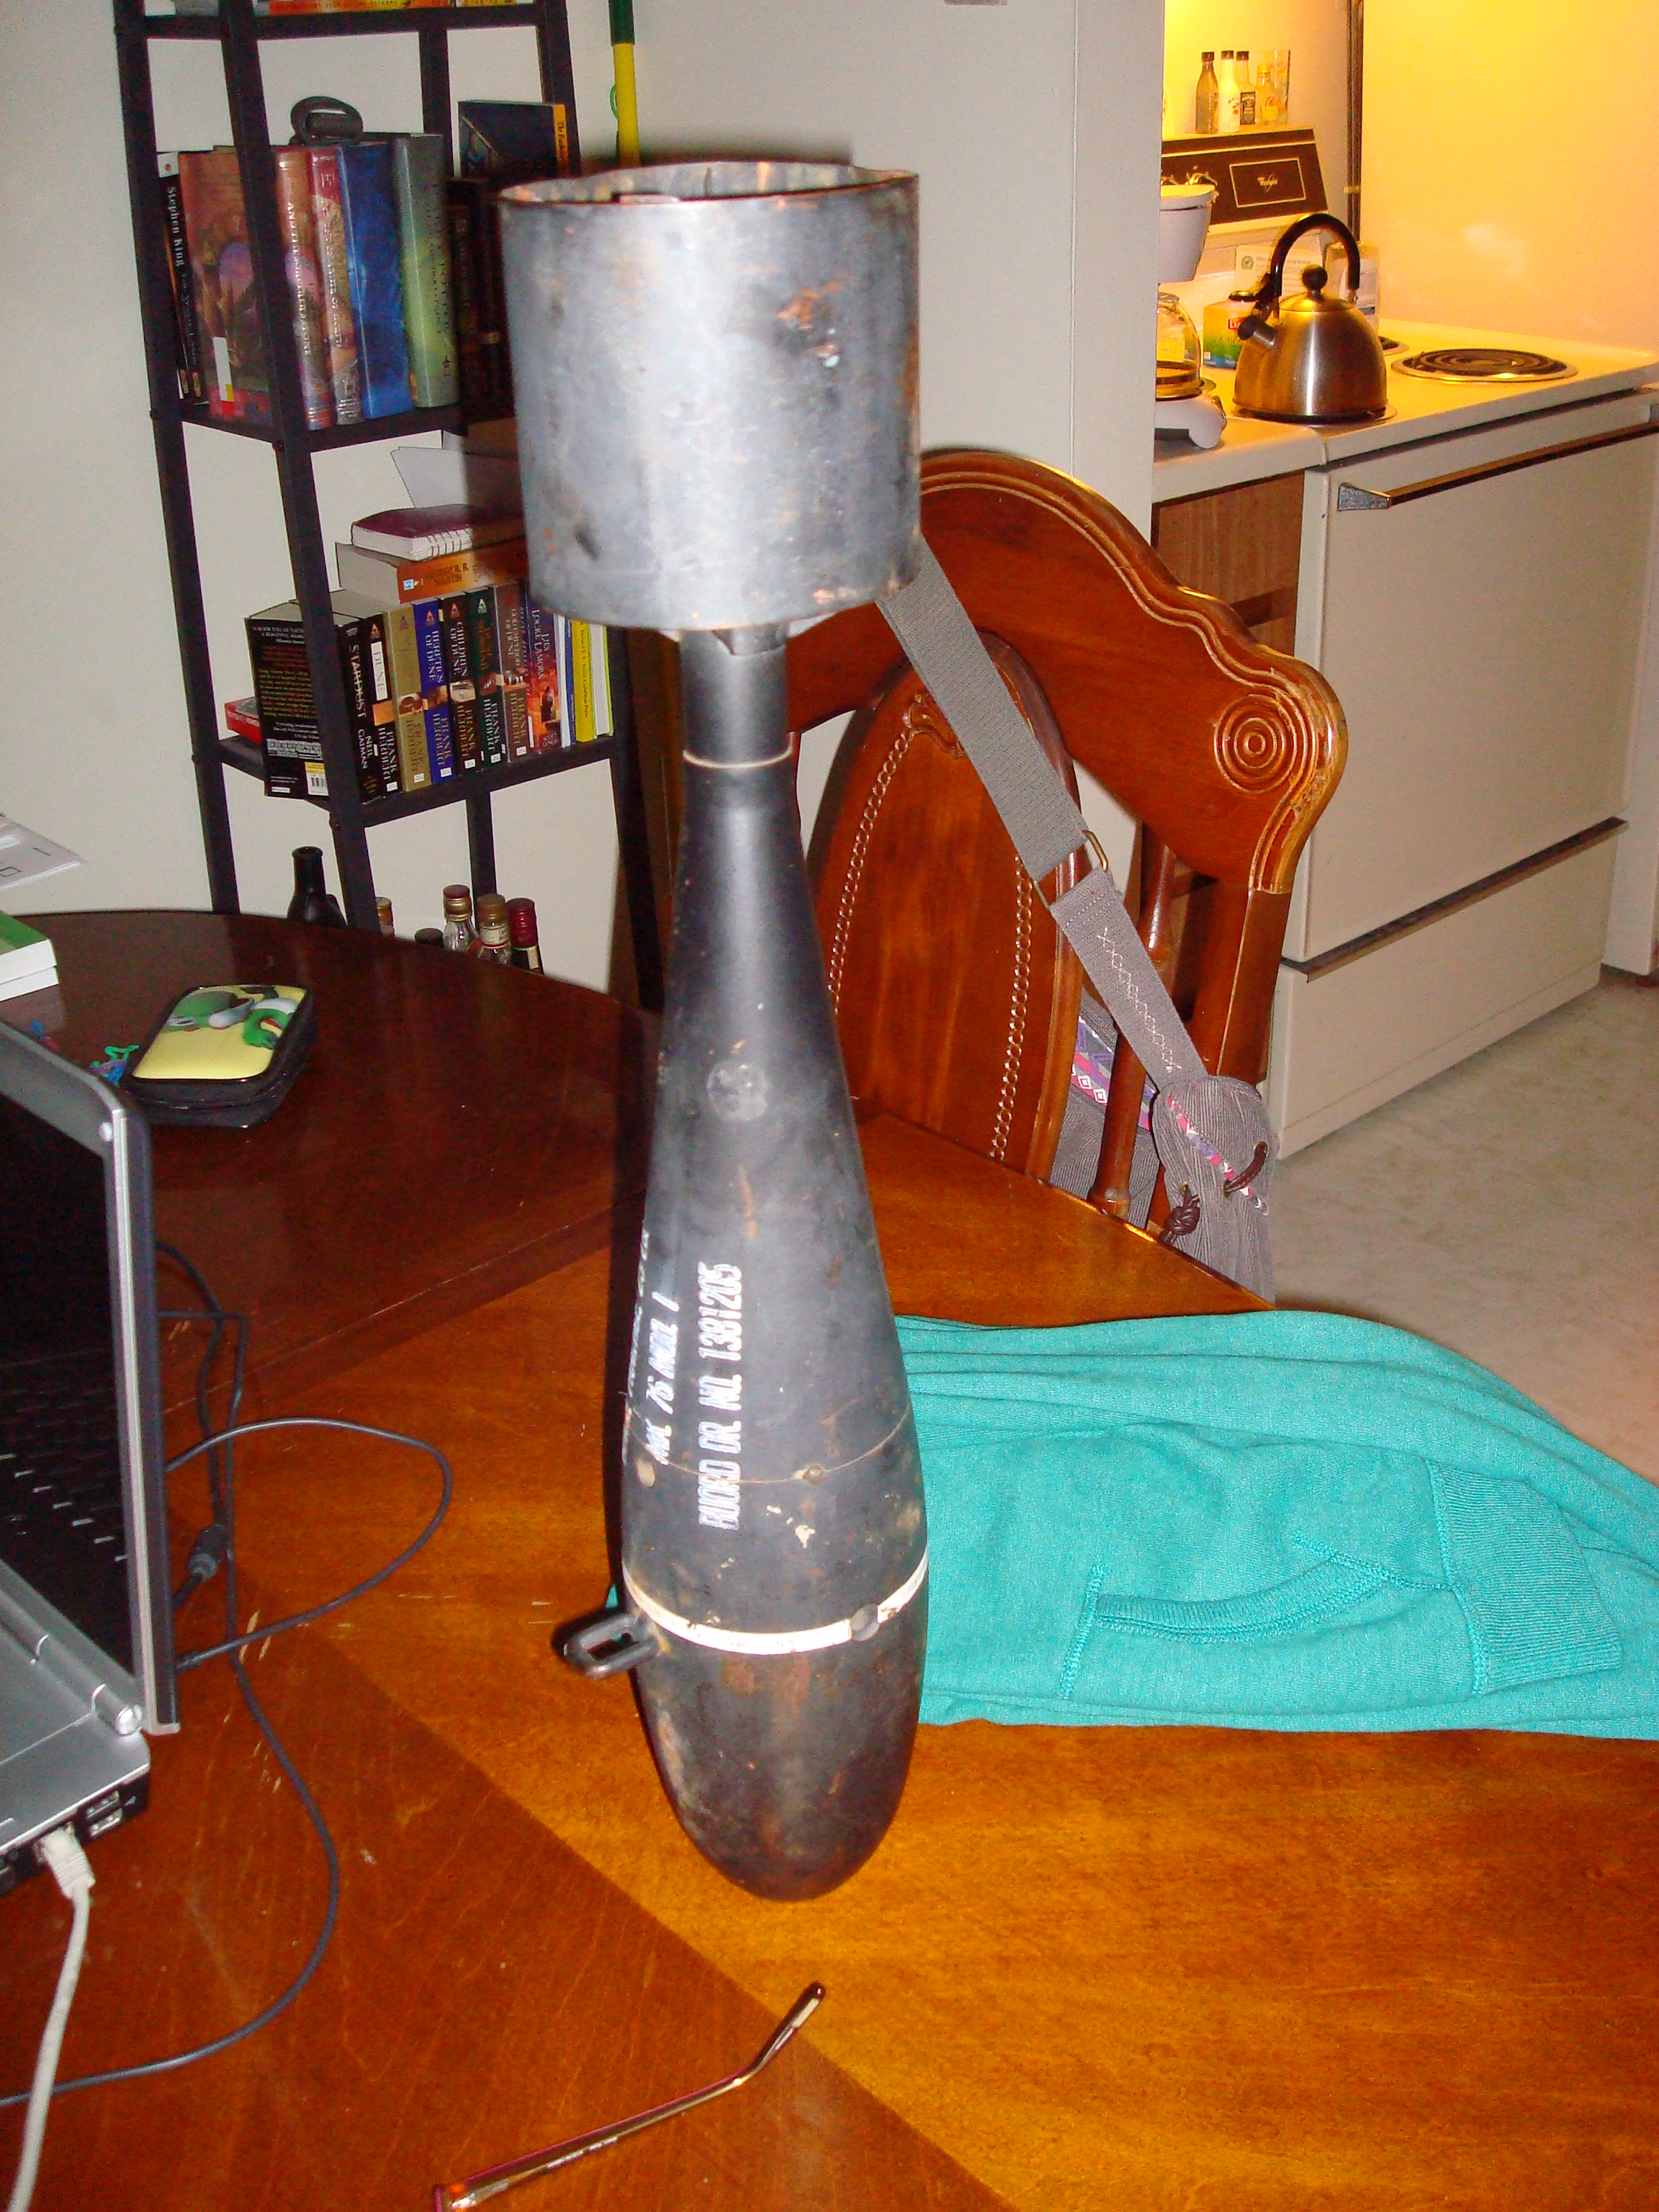  mk 76 mod 1 practice bomb - apparently a WWII-era relic? 